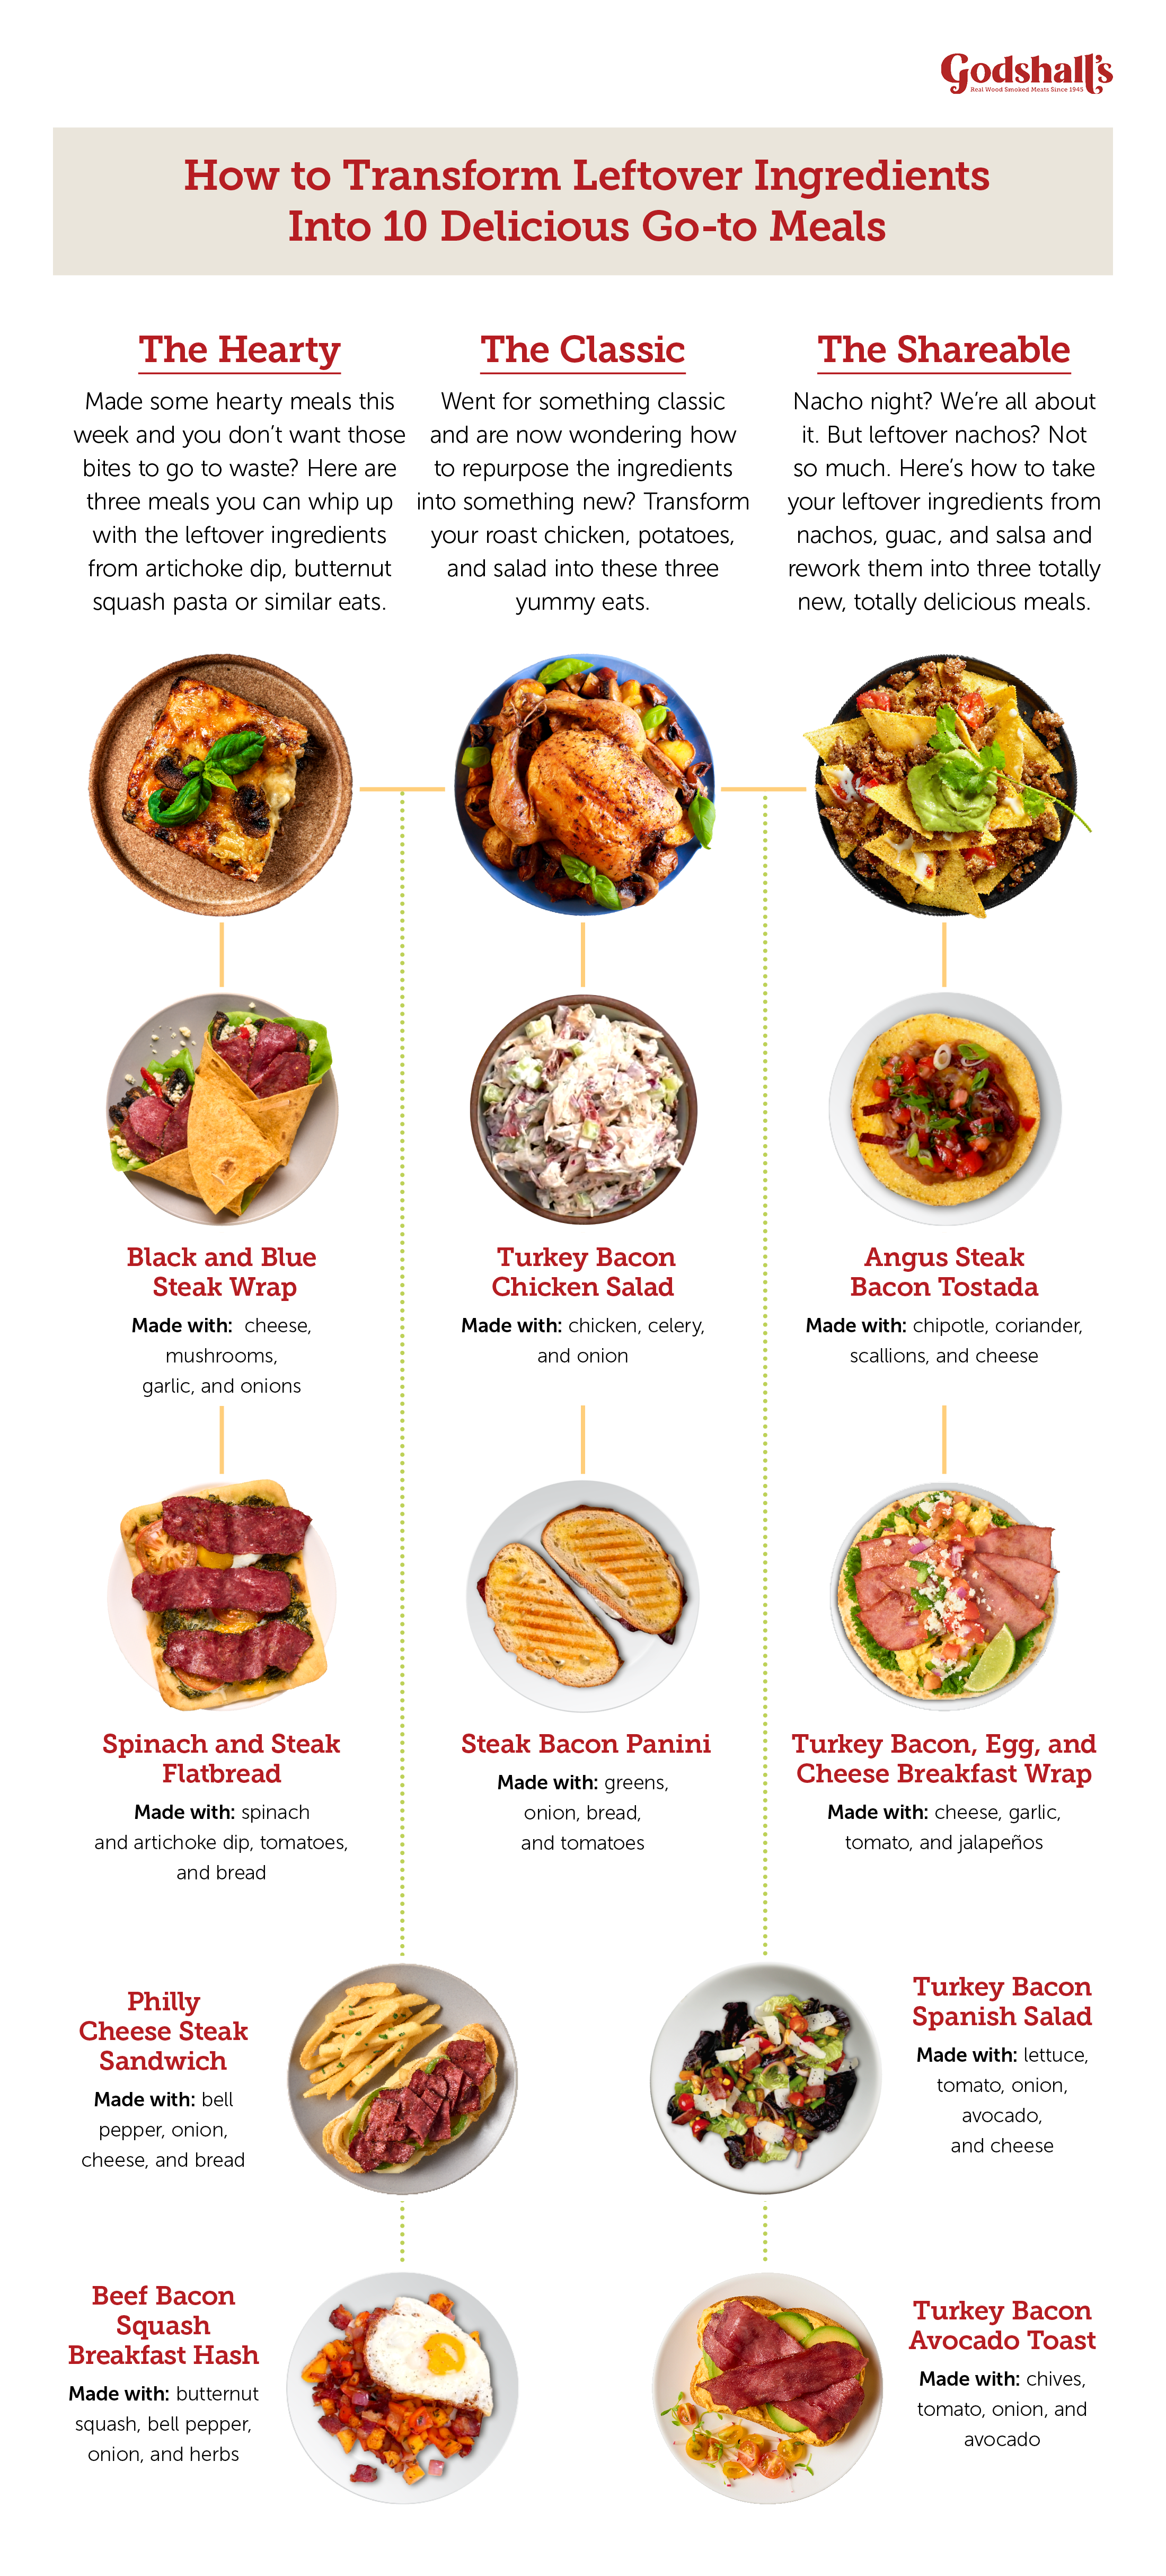 How to transform leftover ingredients into 10 delicious go-to meals - infographic